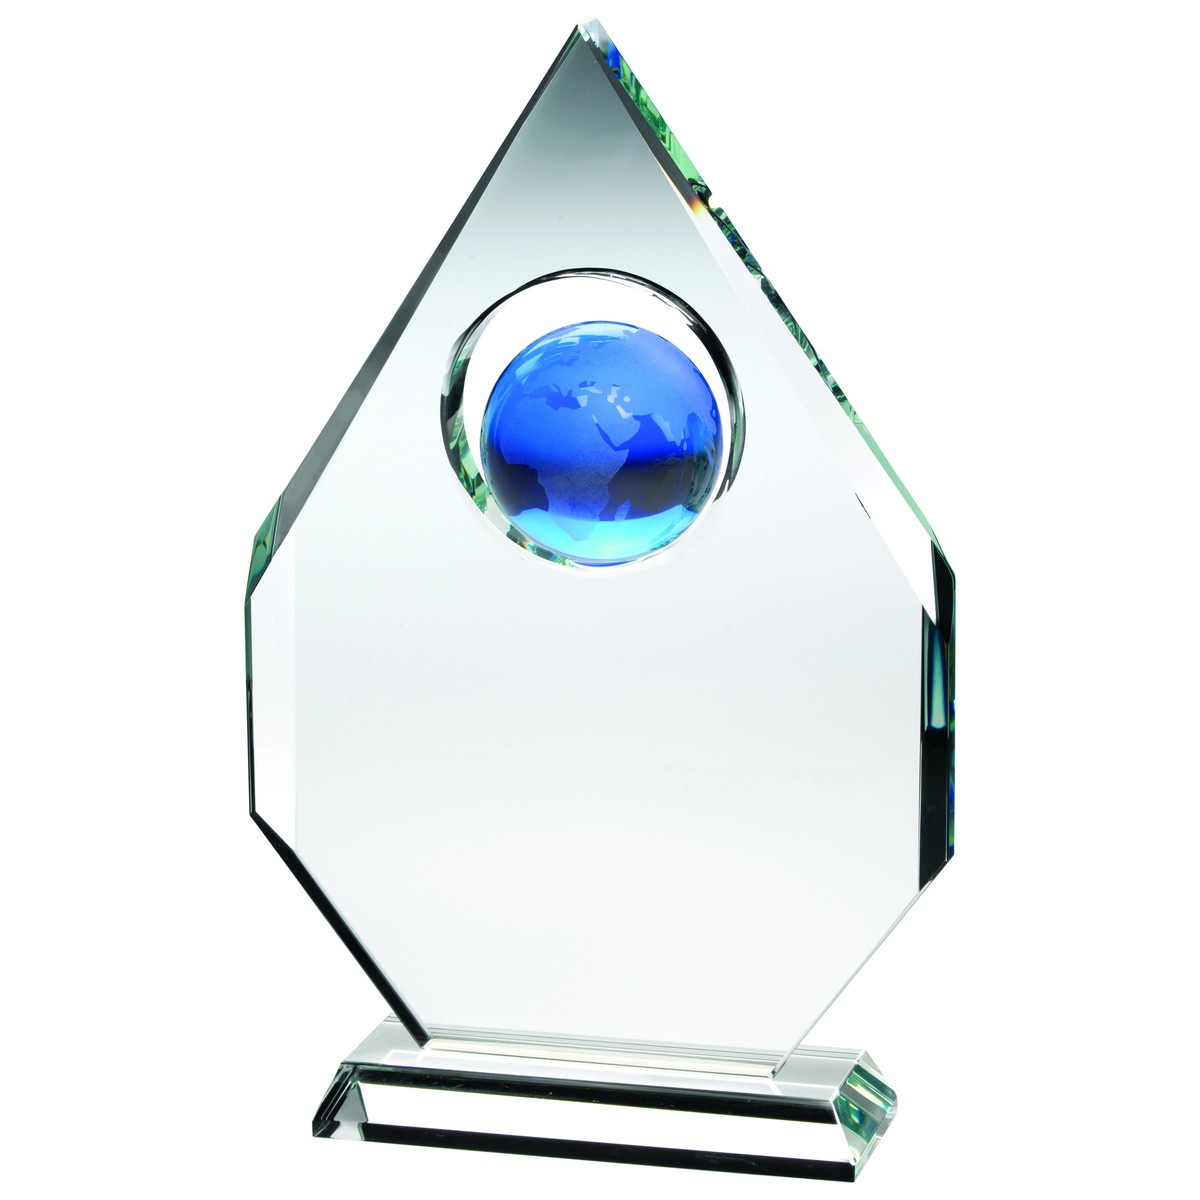 CLEAR GLASS DIAMOND PLAQUE WITH BLUE GLOBE (18MM THICK)